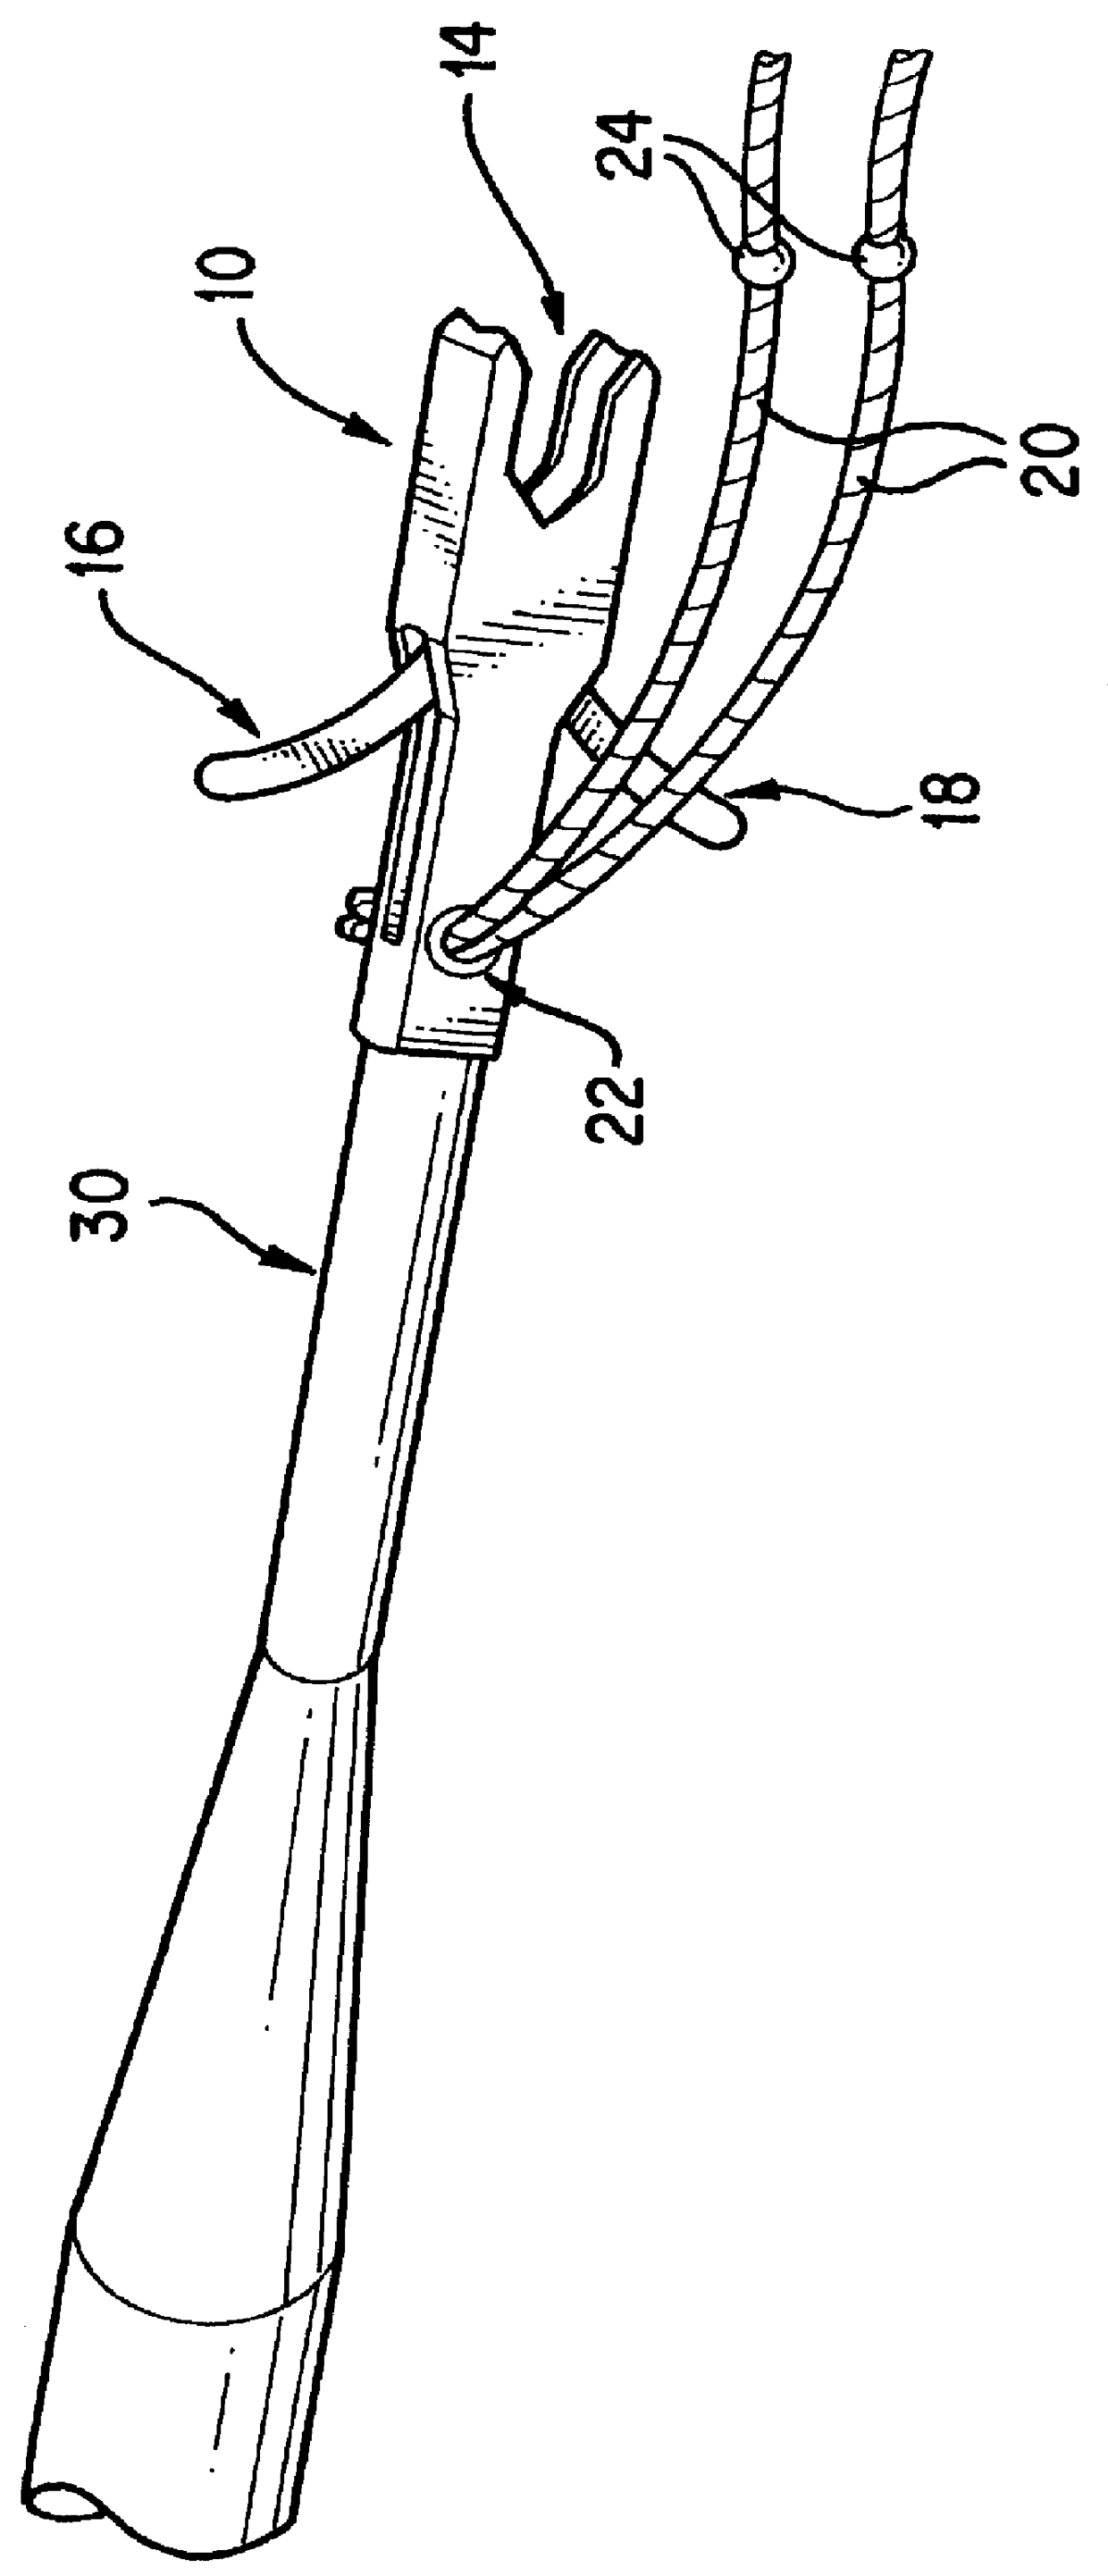 Snagging knotless suture anchor assembly